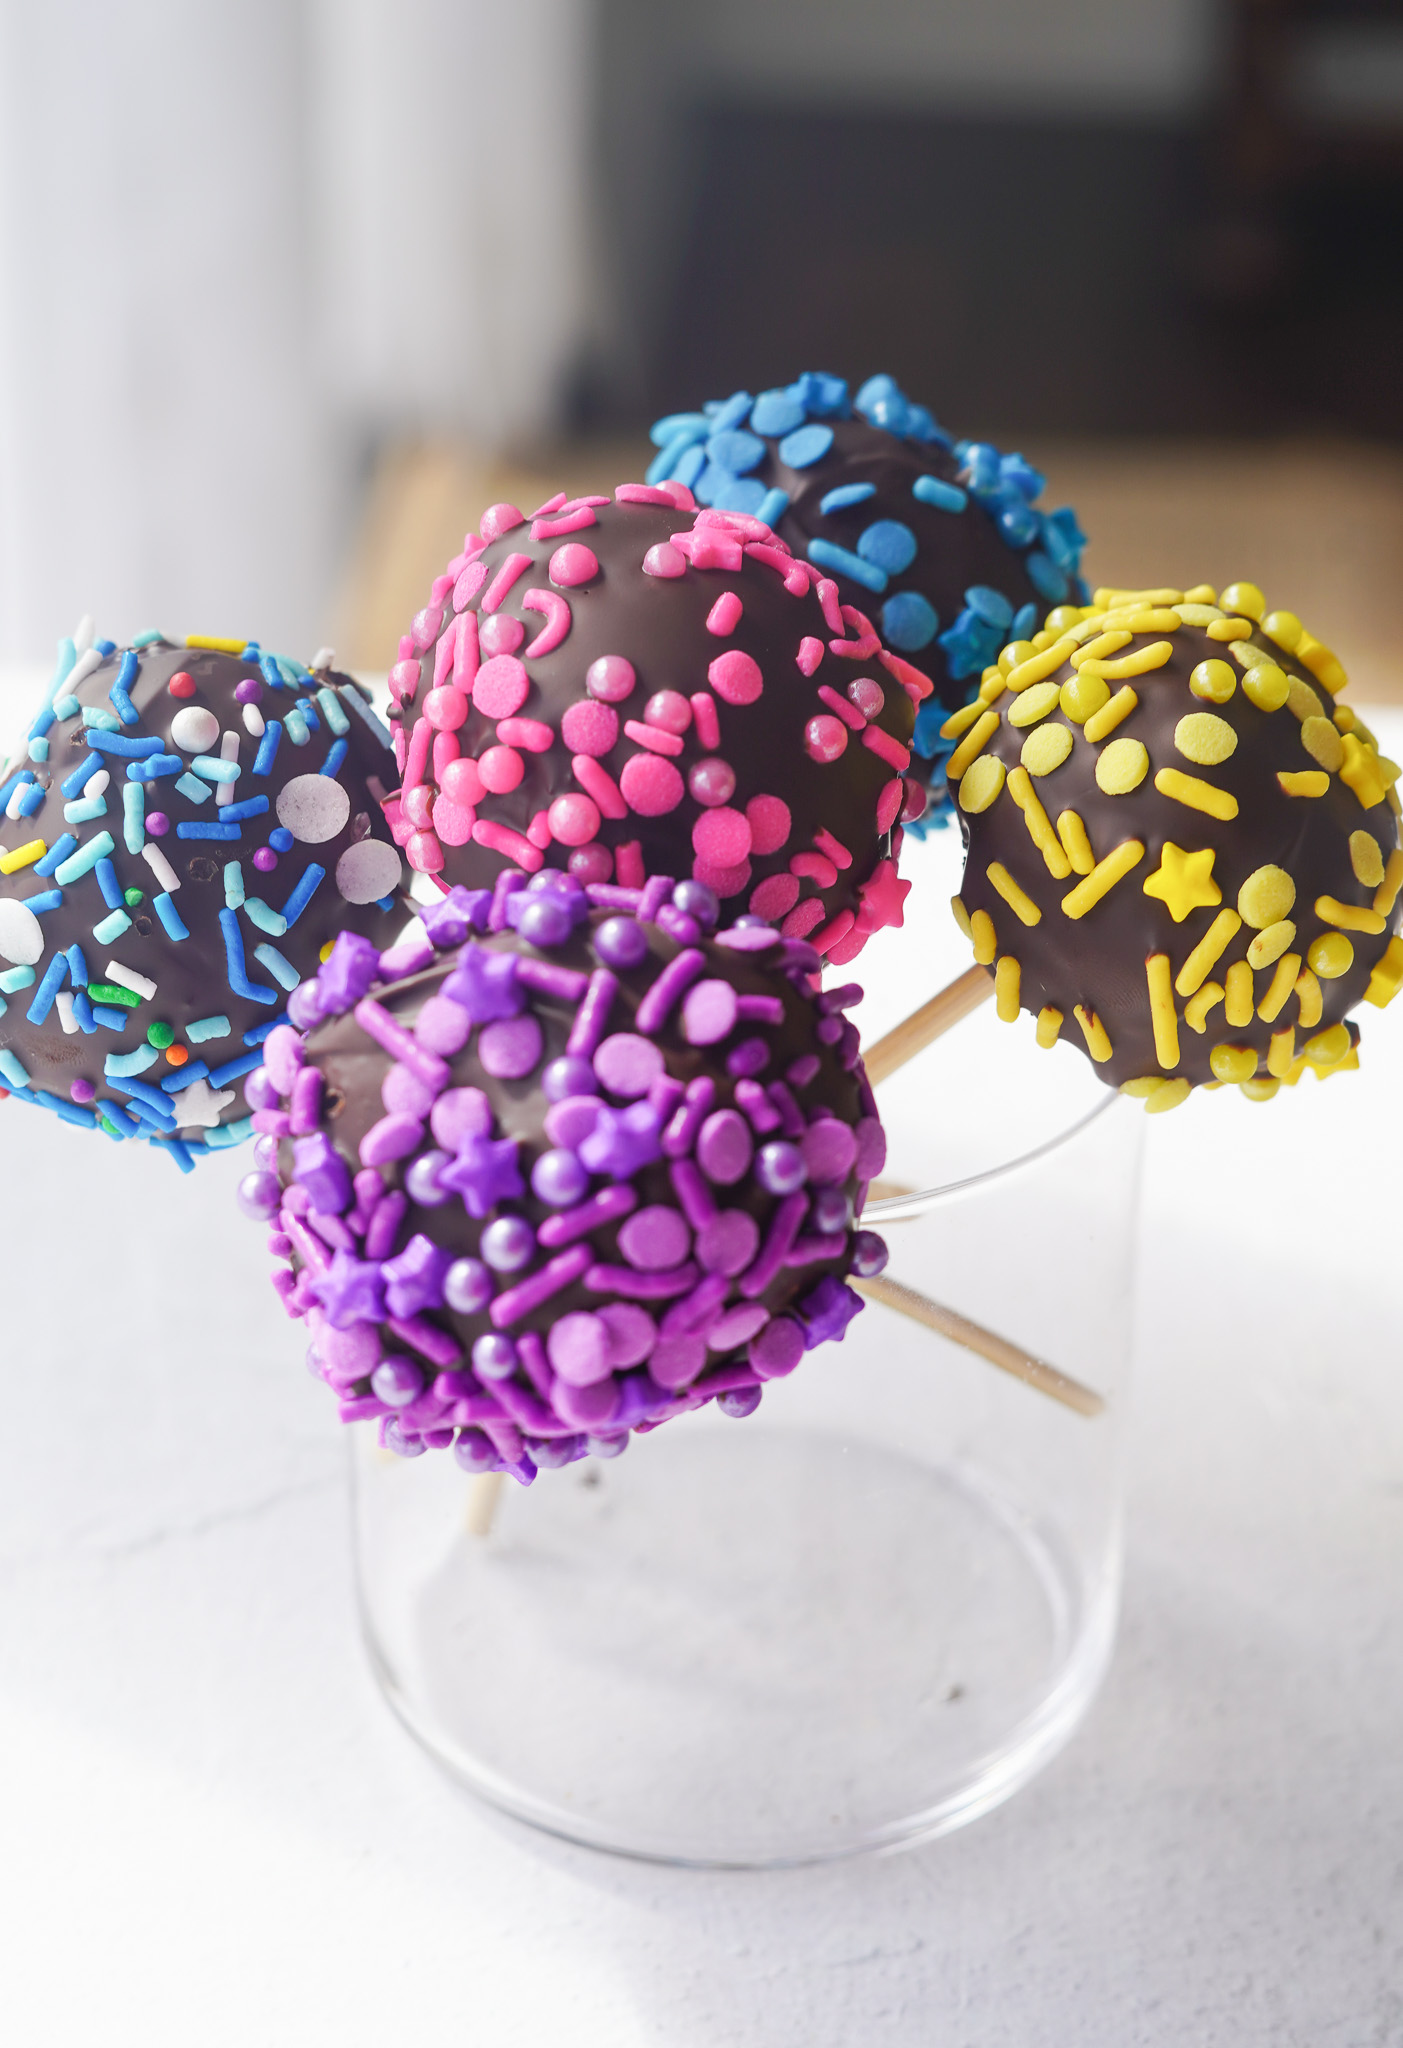 Cake Pops from Leftover Cake: Easy, Fun, Economical - Fluxing Well-thanhphatduhoc.com.vn